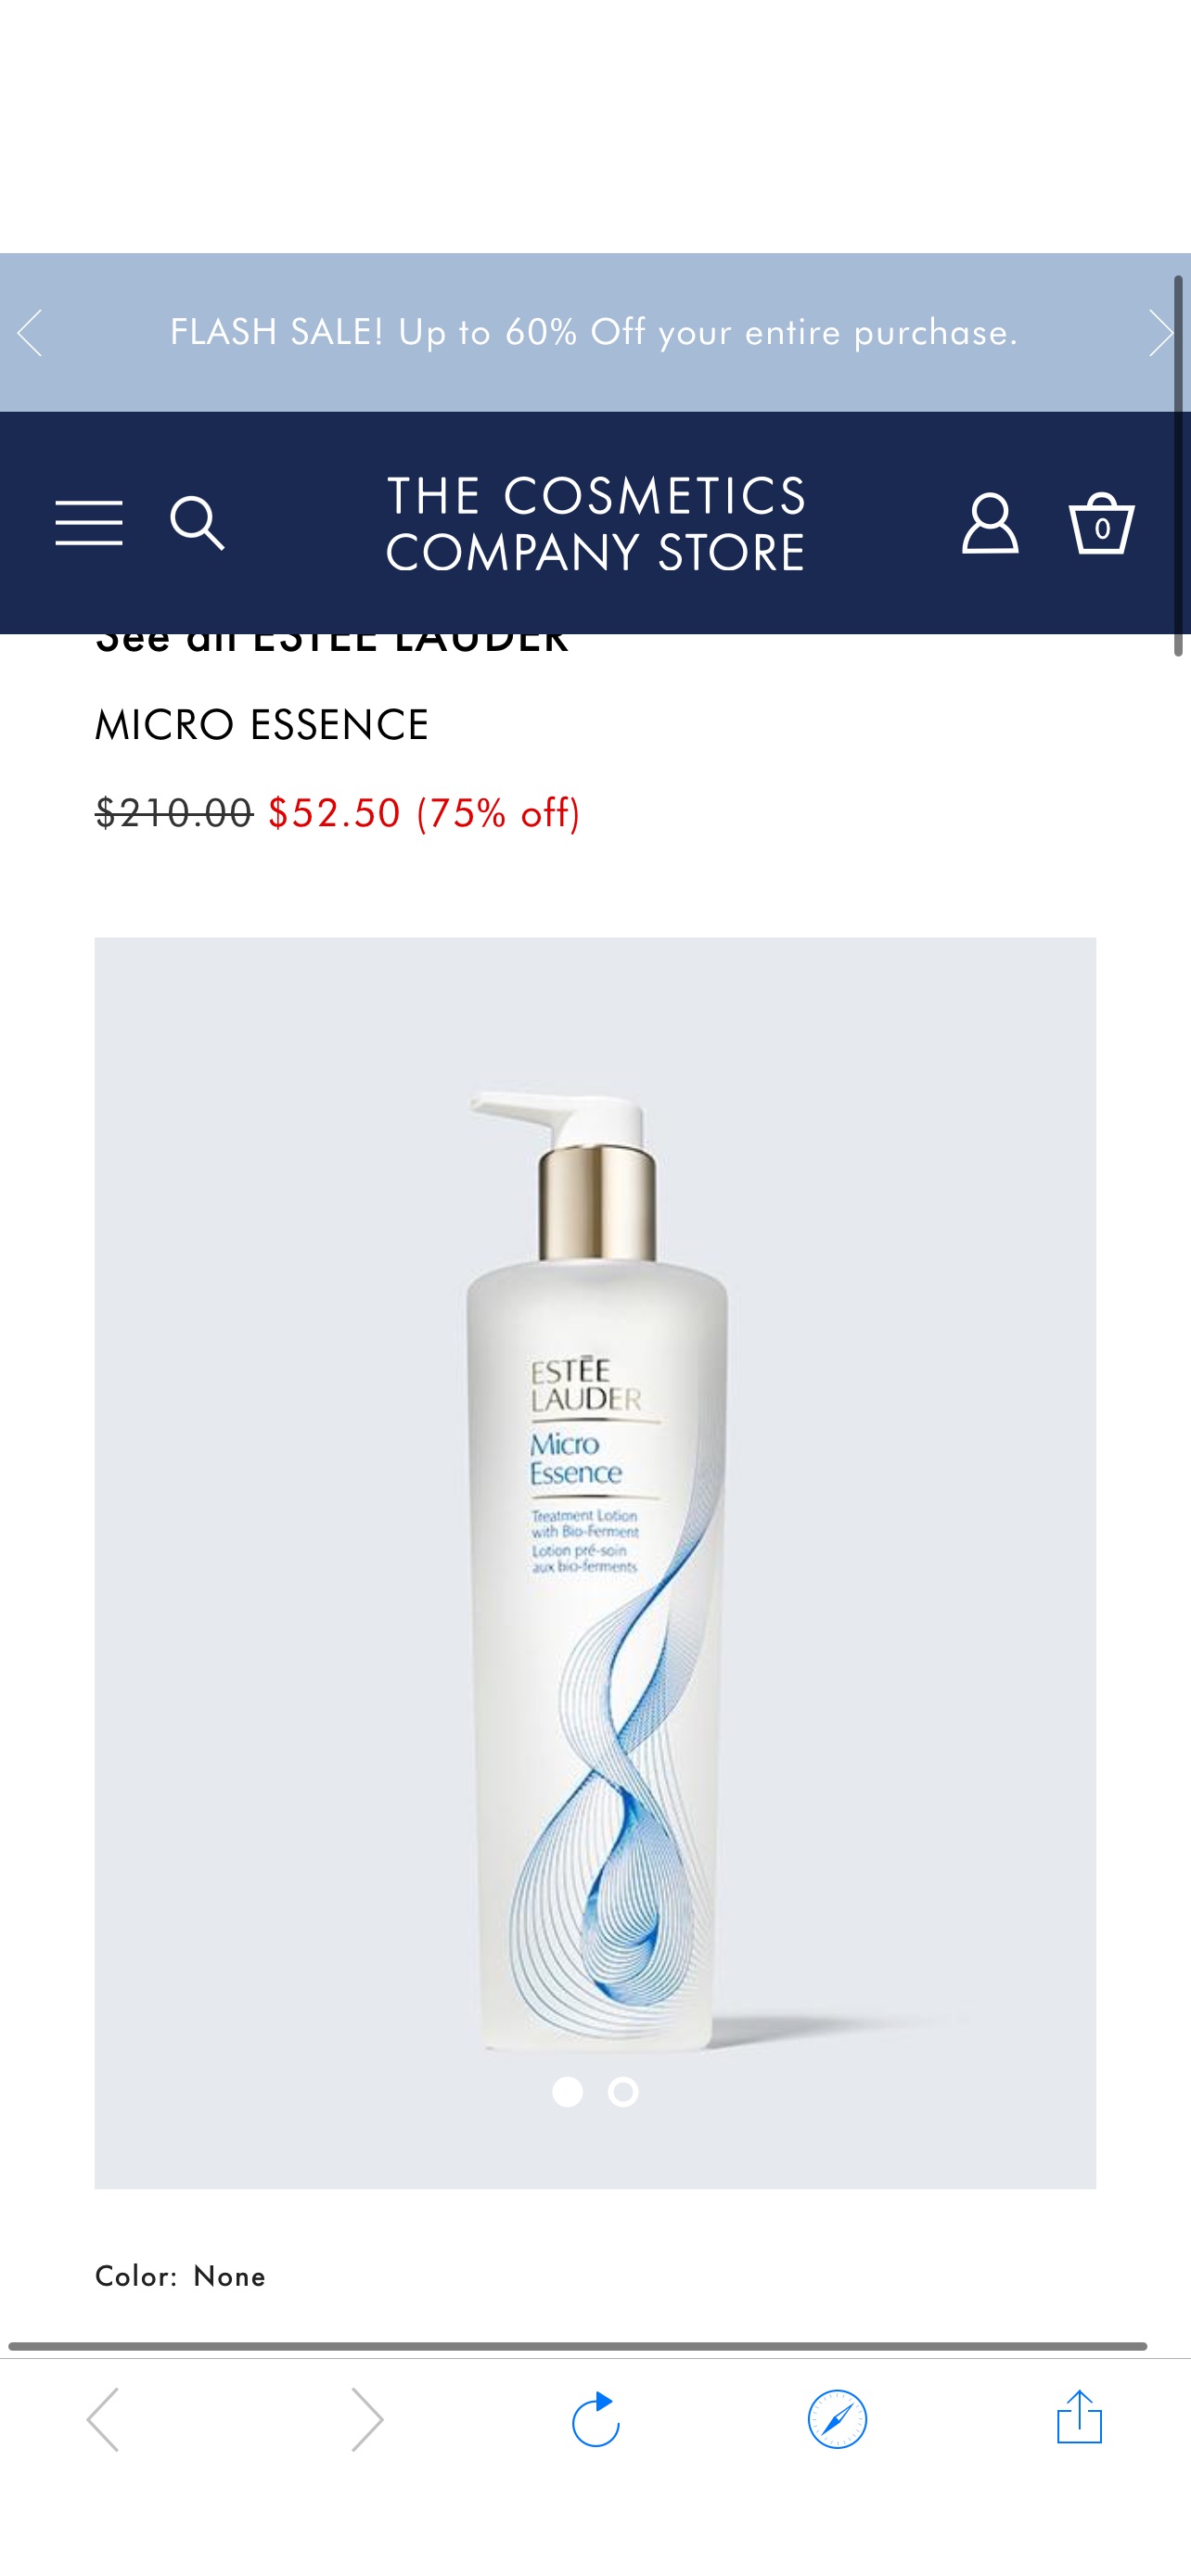 MICRO ESSENCE | The Cosmetics Company Store | Beauty Products, Skin Care & Makeup